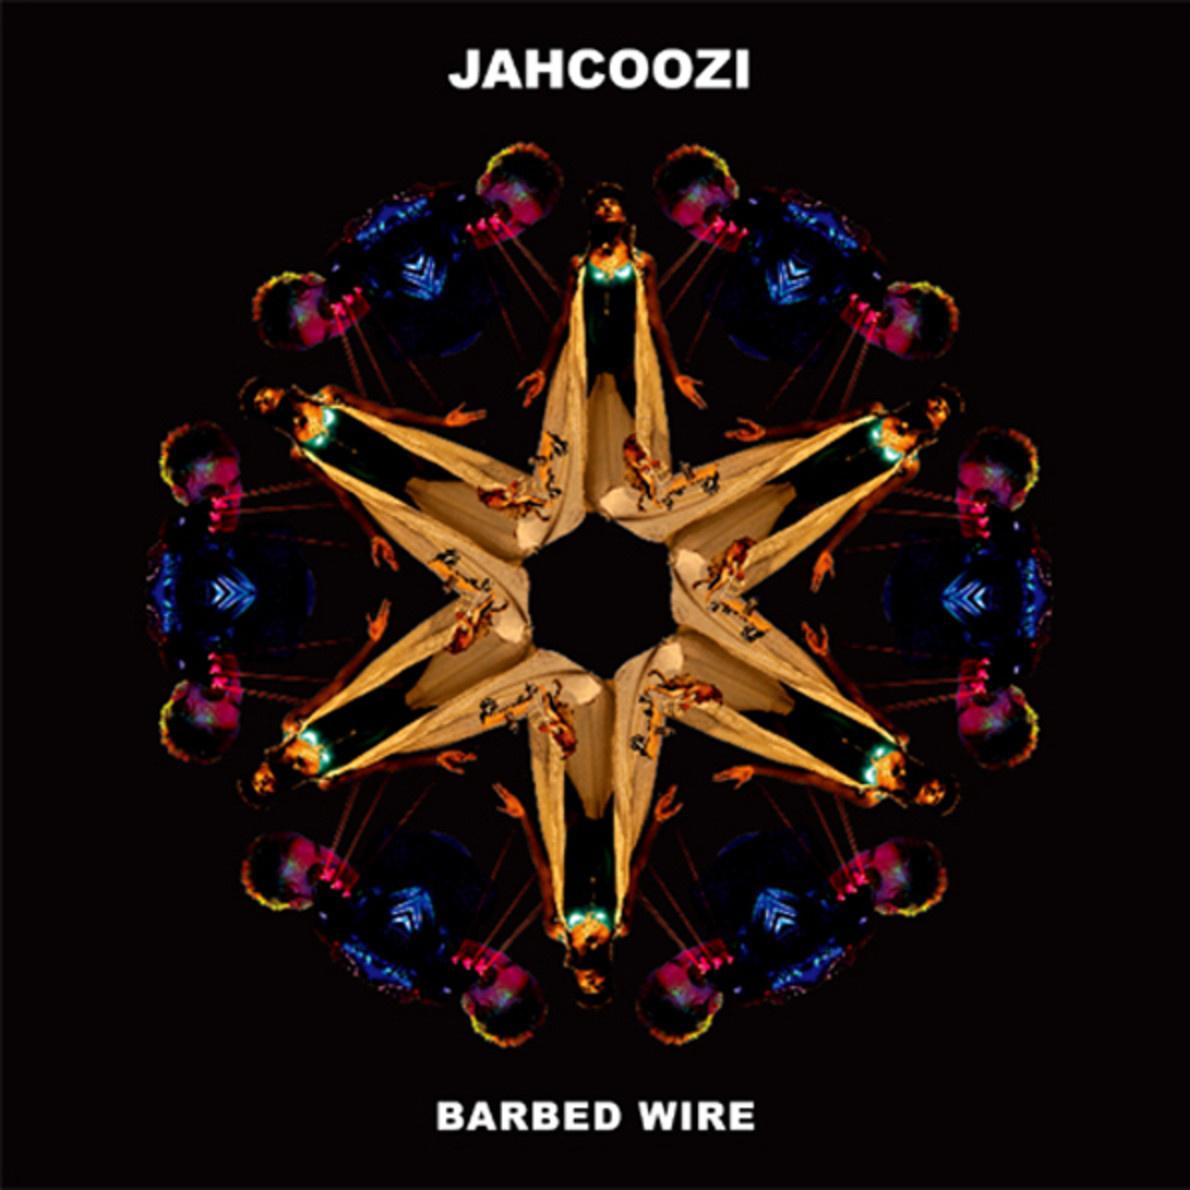 Jahcoozi - Barbed Wire (Housemeister Remix)